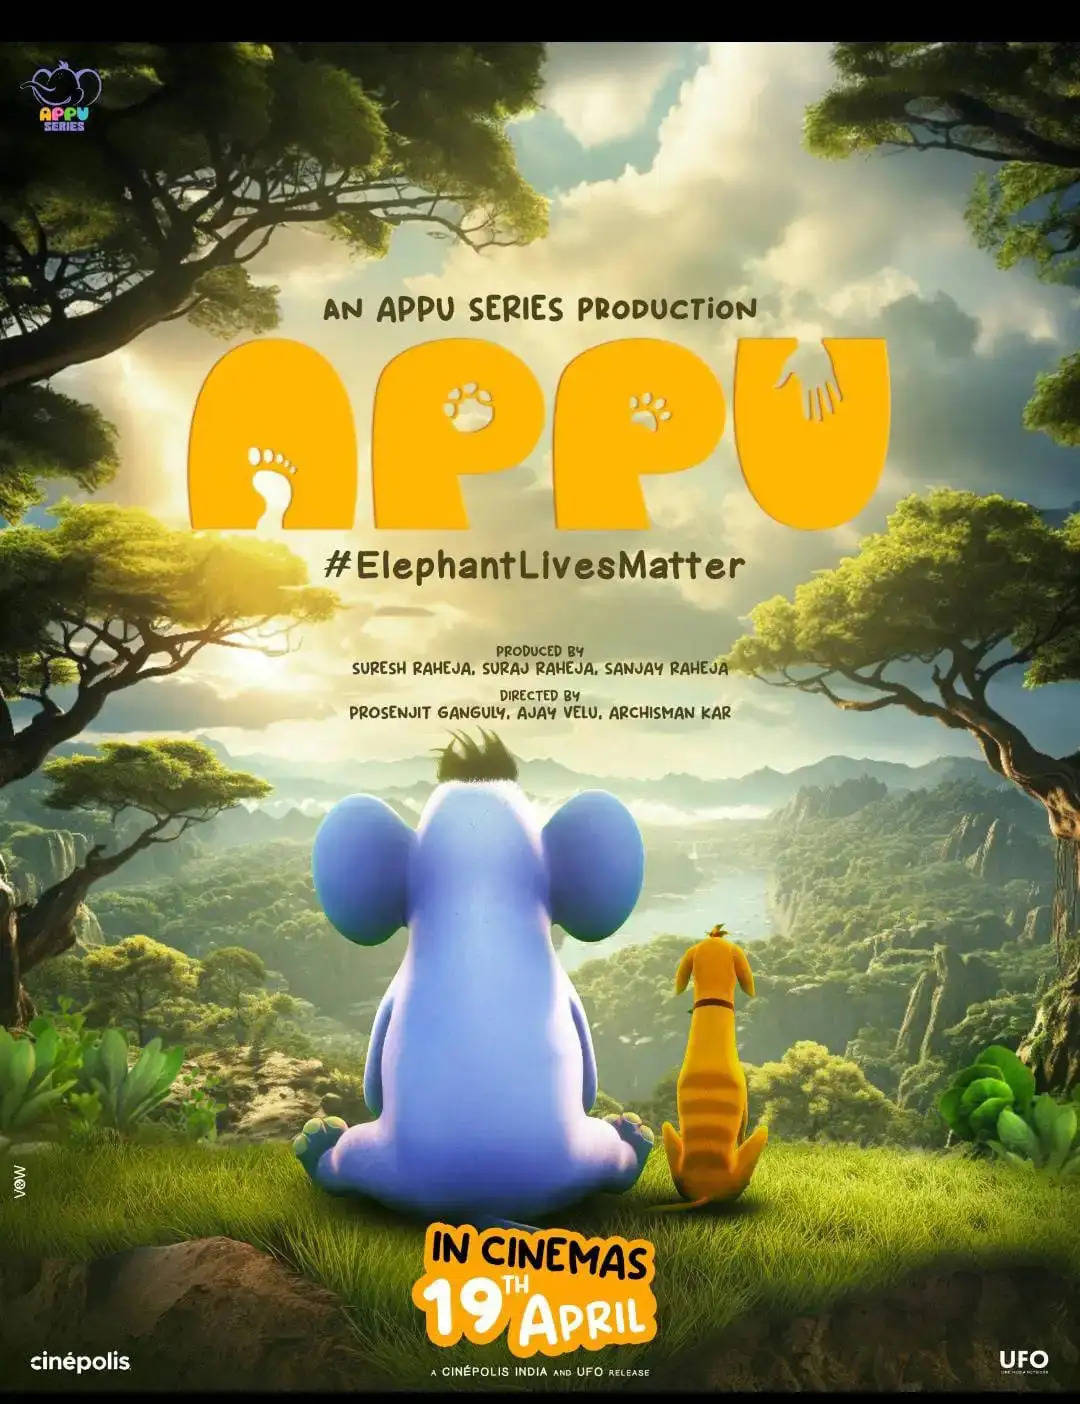 Appu: Inspiring Heroism in Every Child - India's First 4K Animated Feature Film from Appu Series!